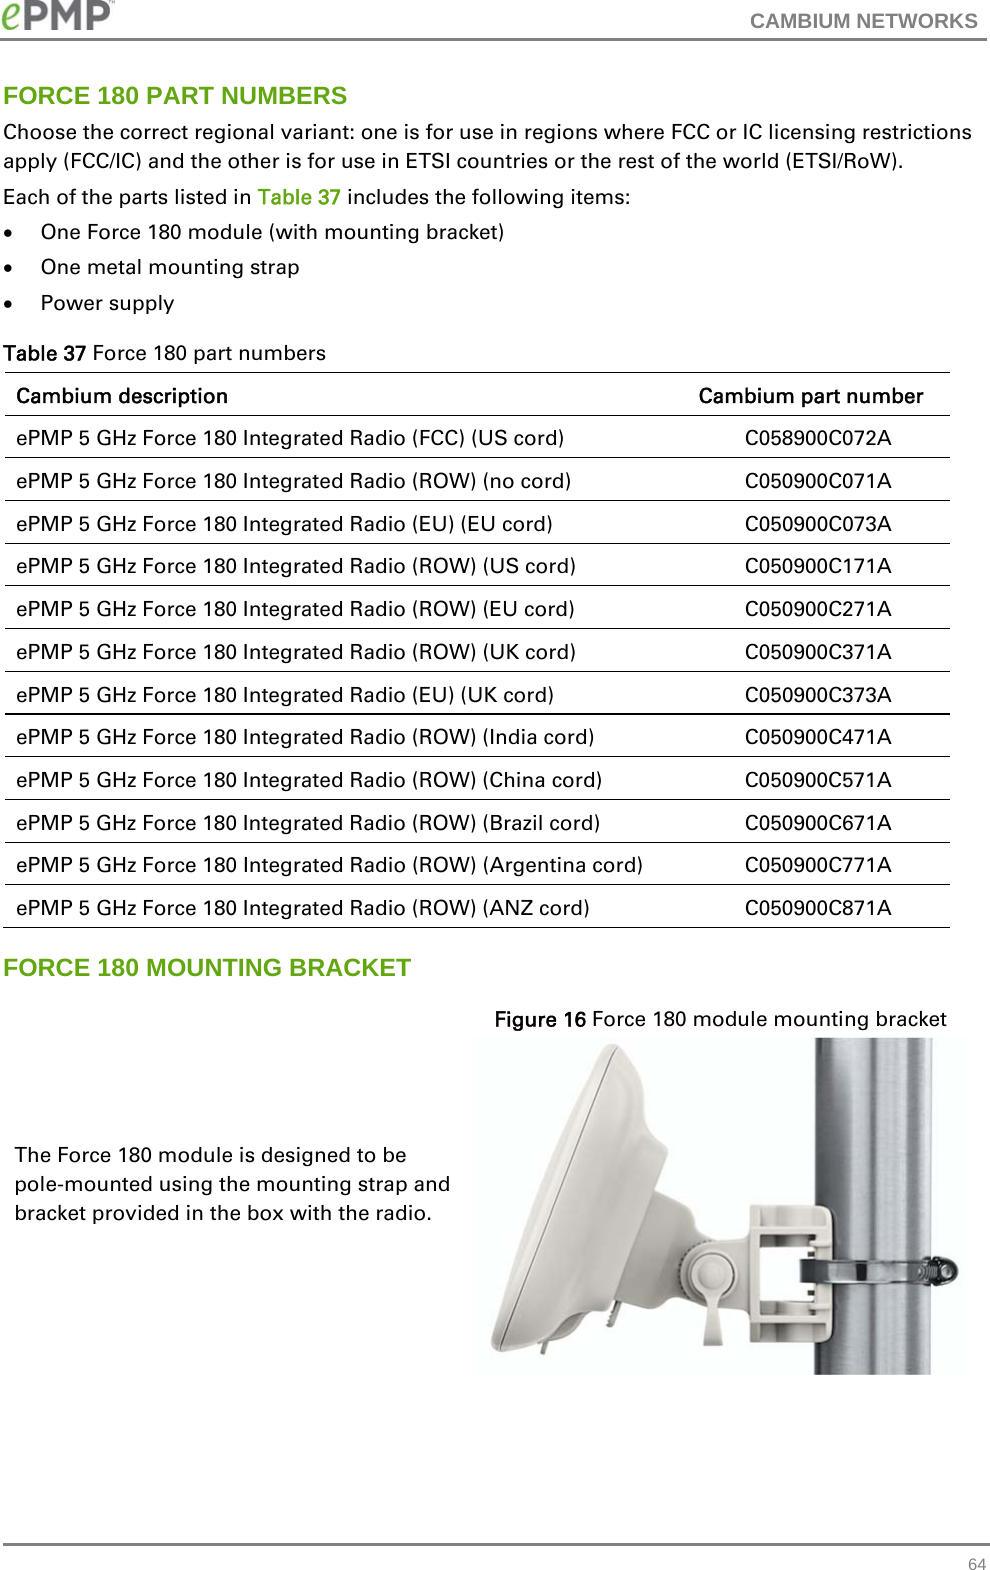 CAMBIUM NETWORKS   64FORCE 180 PART NUMBERS Choose the correct regional variant: one is for use in regions where FCC or IC licensing restrictions apply (FCC/IC) and the other is for use in ETSI countries or the rest of the world (ETSI/RoW). Each of the parts listed in Table 37 includes the following items:  One Force 180 module (with mounting bracket)  One metal mounting strap  Power supply Table 37 Force 180 part numbers Cambium description  Cambium part number ePMP 5 GHz Force 180 Integrated Radio (FCC) (US cord)  C058900C072A ePMP 5 GHz Force 180 Integrated Radio (ROW) (no cord)  C050900C071A ePMP 5 GHz Force 180 Integrated Radio (EU) (EU cord)  C050900C073A ePMP 5 GHz Force 180 Integrated Radio (ROW) (US cord)  C050900C171A ePMP 5 GHz Force 180 Integrated Radio (ROW) (EU cord)  C050900C271A ePMP 5 GHz Force 180 Integrated Radio (ROW) (UK cord)  C050900C371A ePMP 5 GHz Force 180 Integrated Radio (EU) (UK cord)  C050900C373A ePMP 5 GHz Force 180 Integrated Radio (ROW) (India cord)  C050900C471A ePMP 5 GHz Force 180 Integrated Radio (ROW) (China cord)  C050900C571A ePMP 5 GHz Force 180 Integrated Radio (ROW) (Brazil cord)  C050900C671A ePMP 5 GHz Force 180 Integrated Radio (ROW) (Argentina cord)  C050900C771A ePMP 5 GHz Force 180 Integrated Radio (ROW) (ANZ cord)  C050900C871A FORCE 180 MOUNTING BRACKET The Force 180 module is designed to be pole-mounted using the mounting strap and bracket provided in the box with the radio.   Figure 16 Force 180 module mounting bracket   